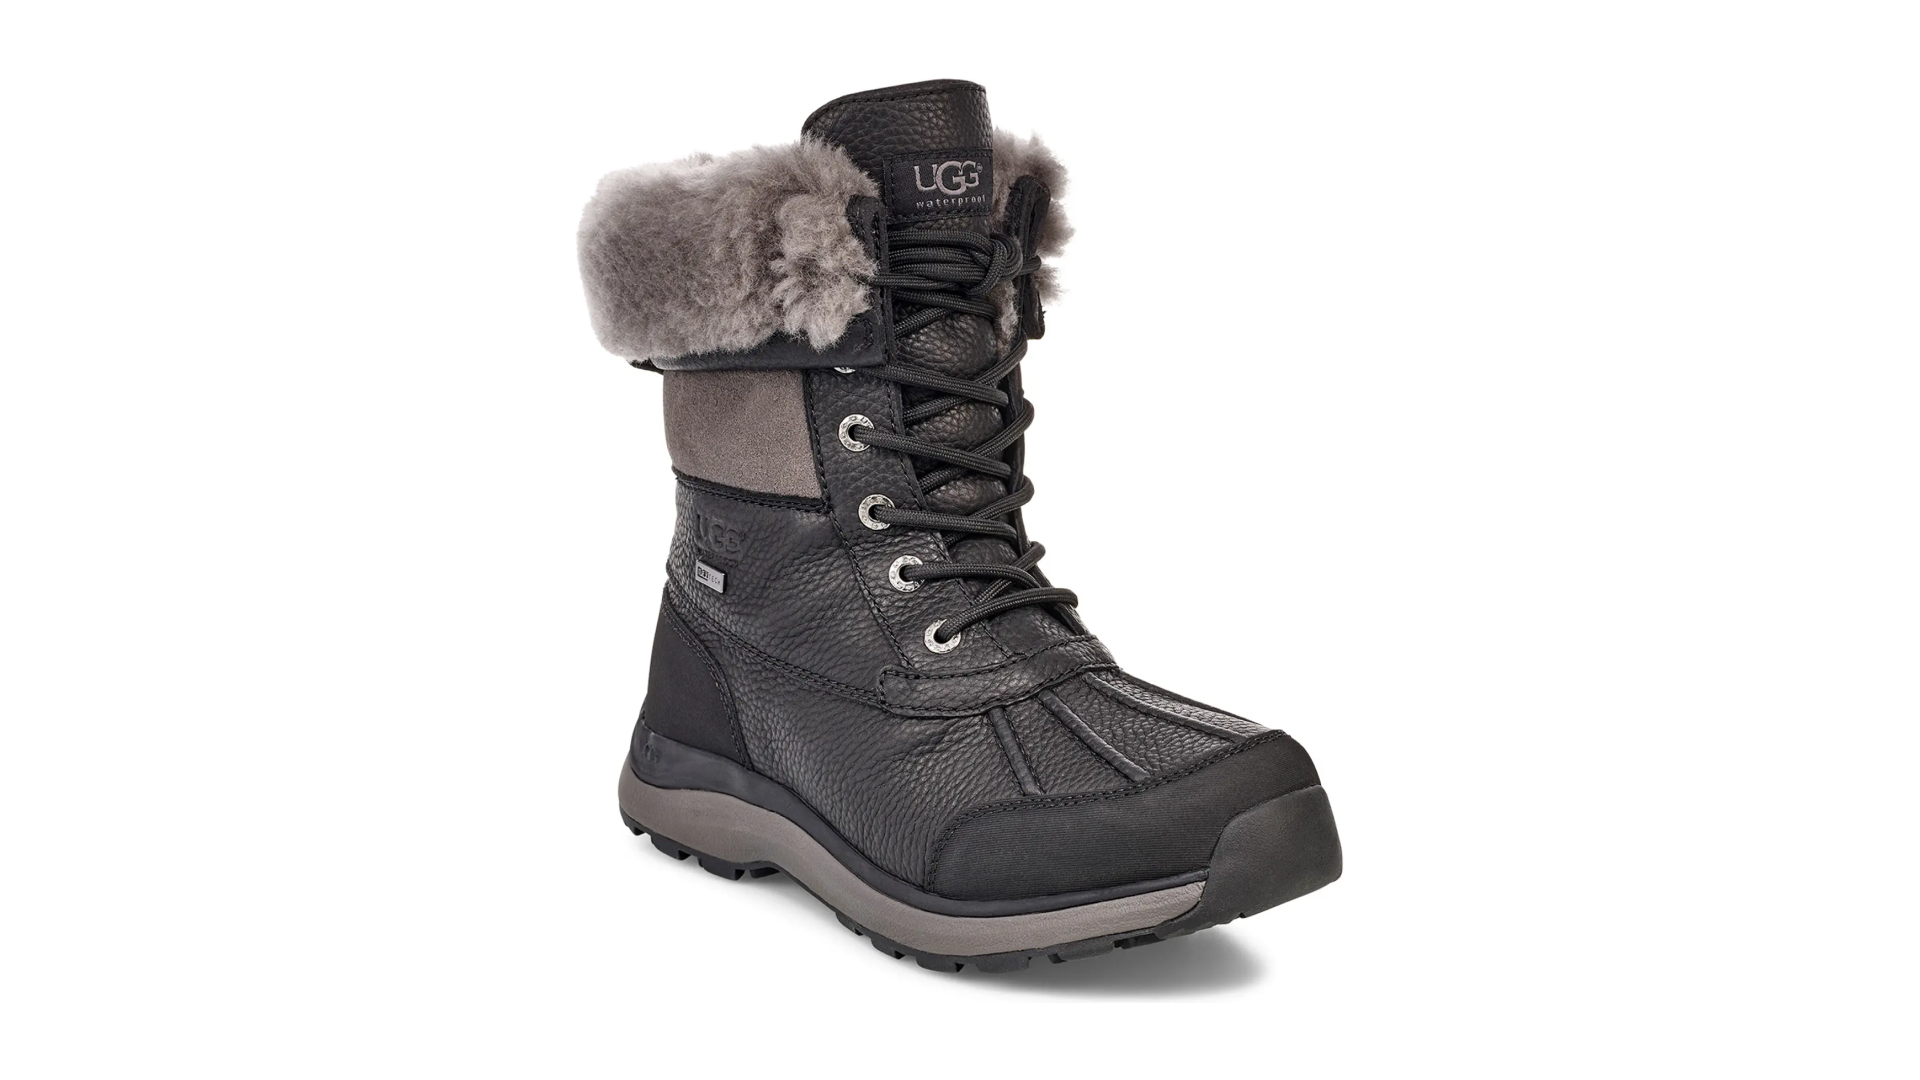 Winter Boots and Waterproof Shoes To Keep Your Feet Cozy